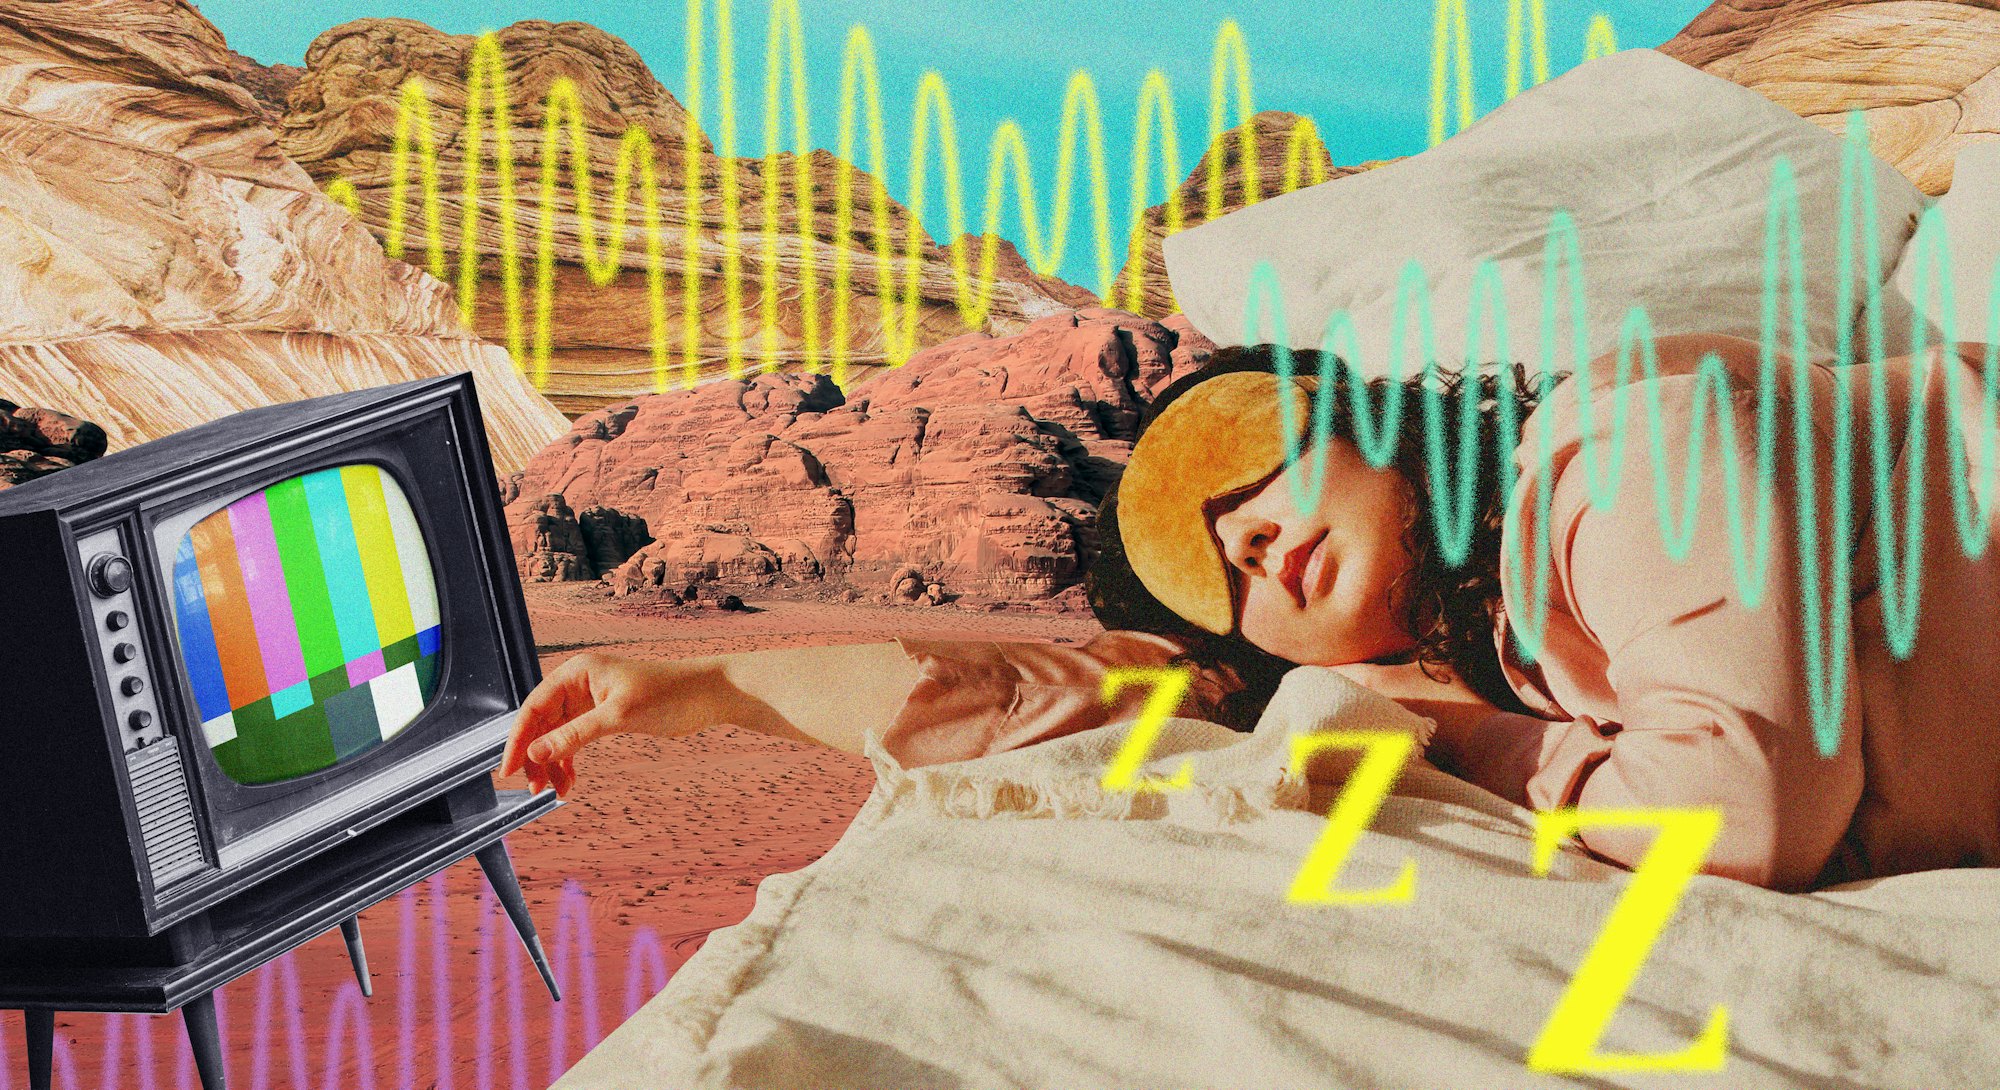 An abstract collage of a woman with a sleeping mask who sleeps wth background noise